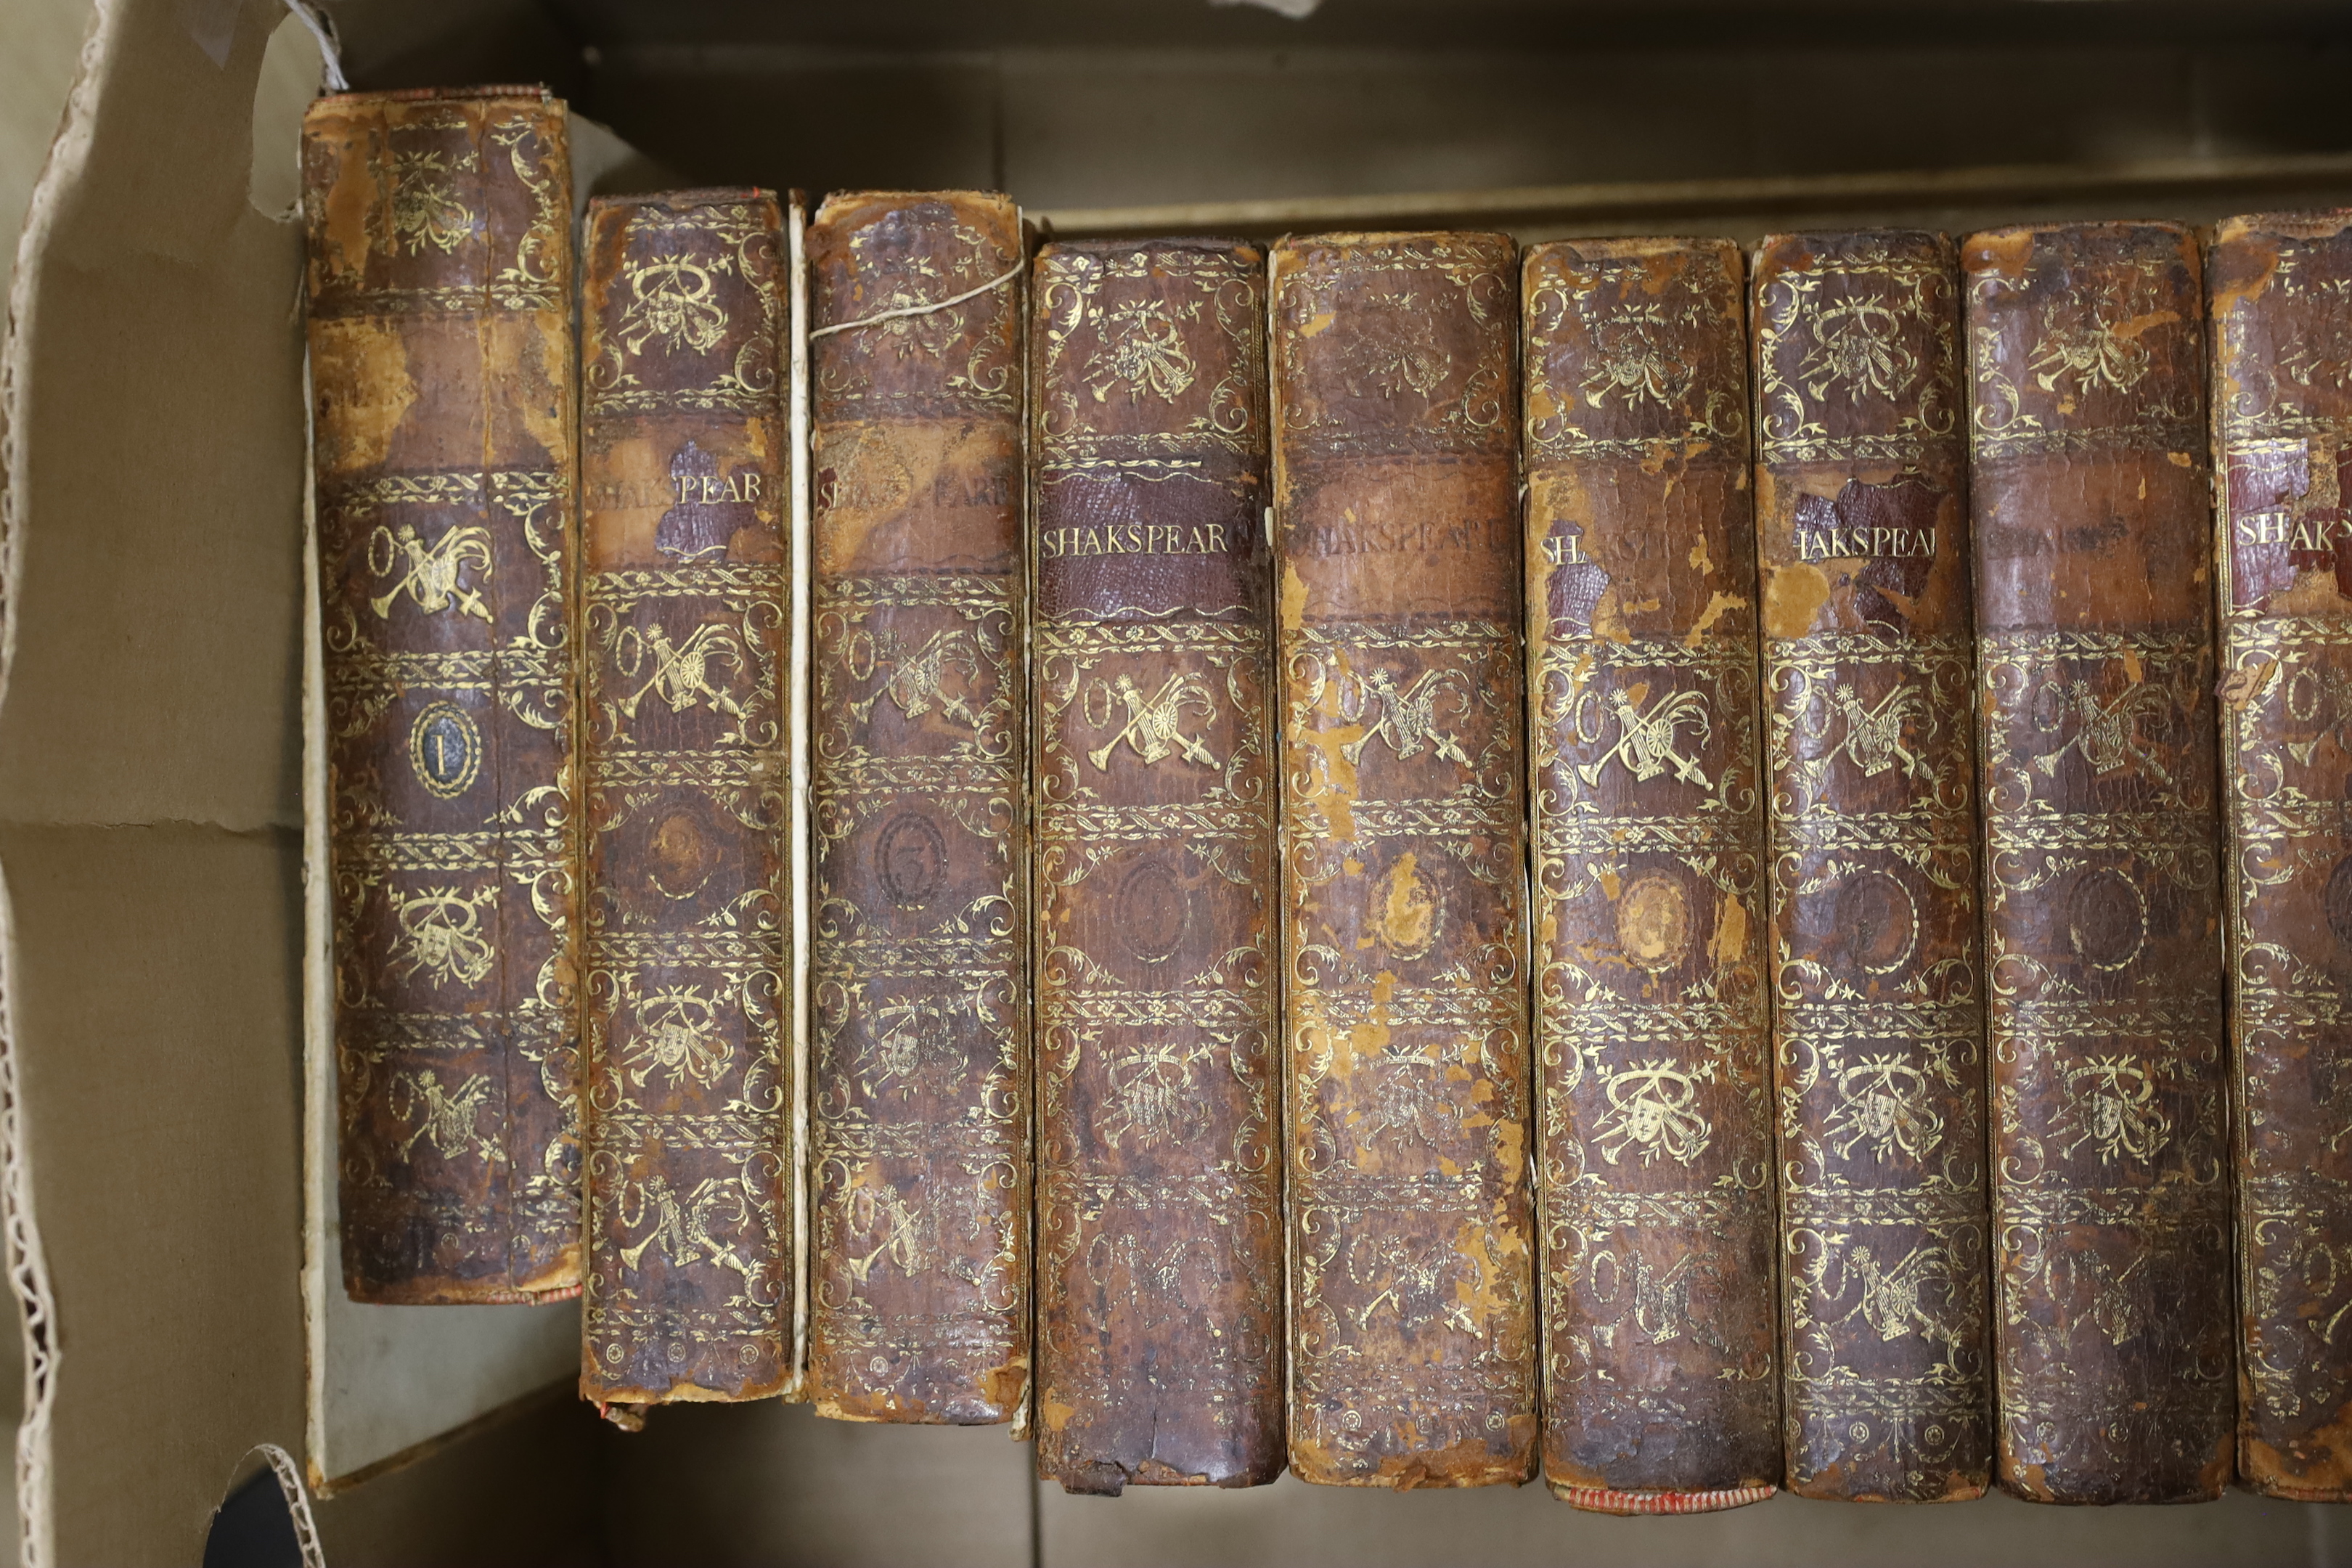 A set of ten Shakespeare volumes (1785) and a set of The Greville Memoirs